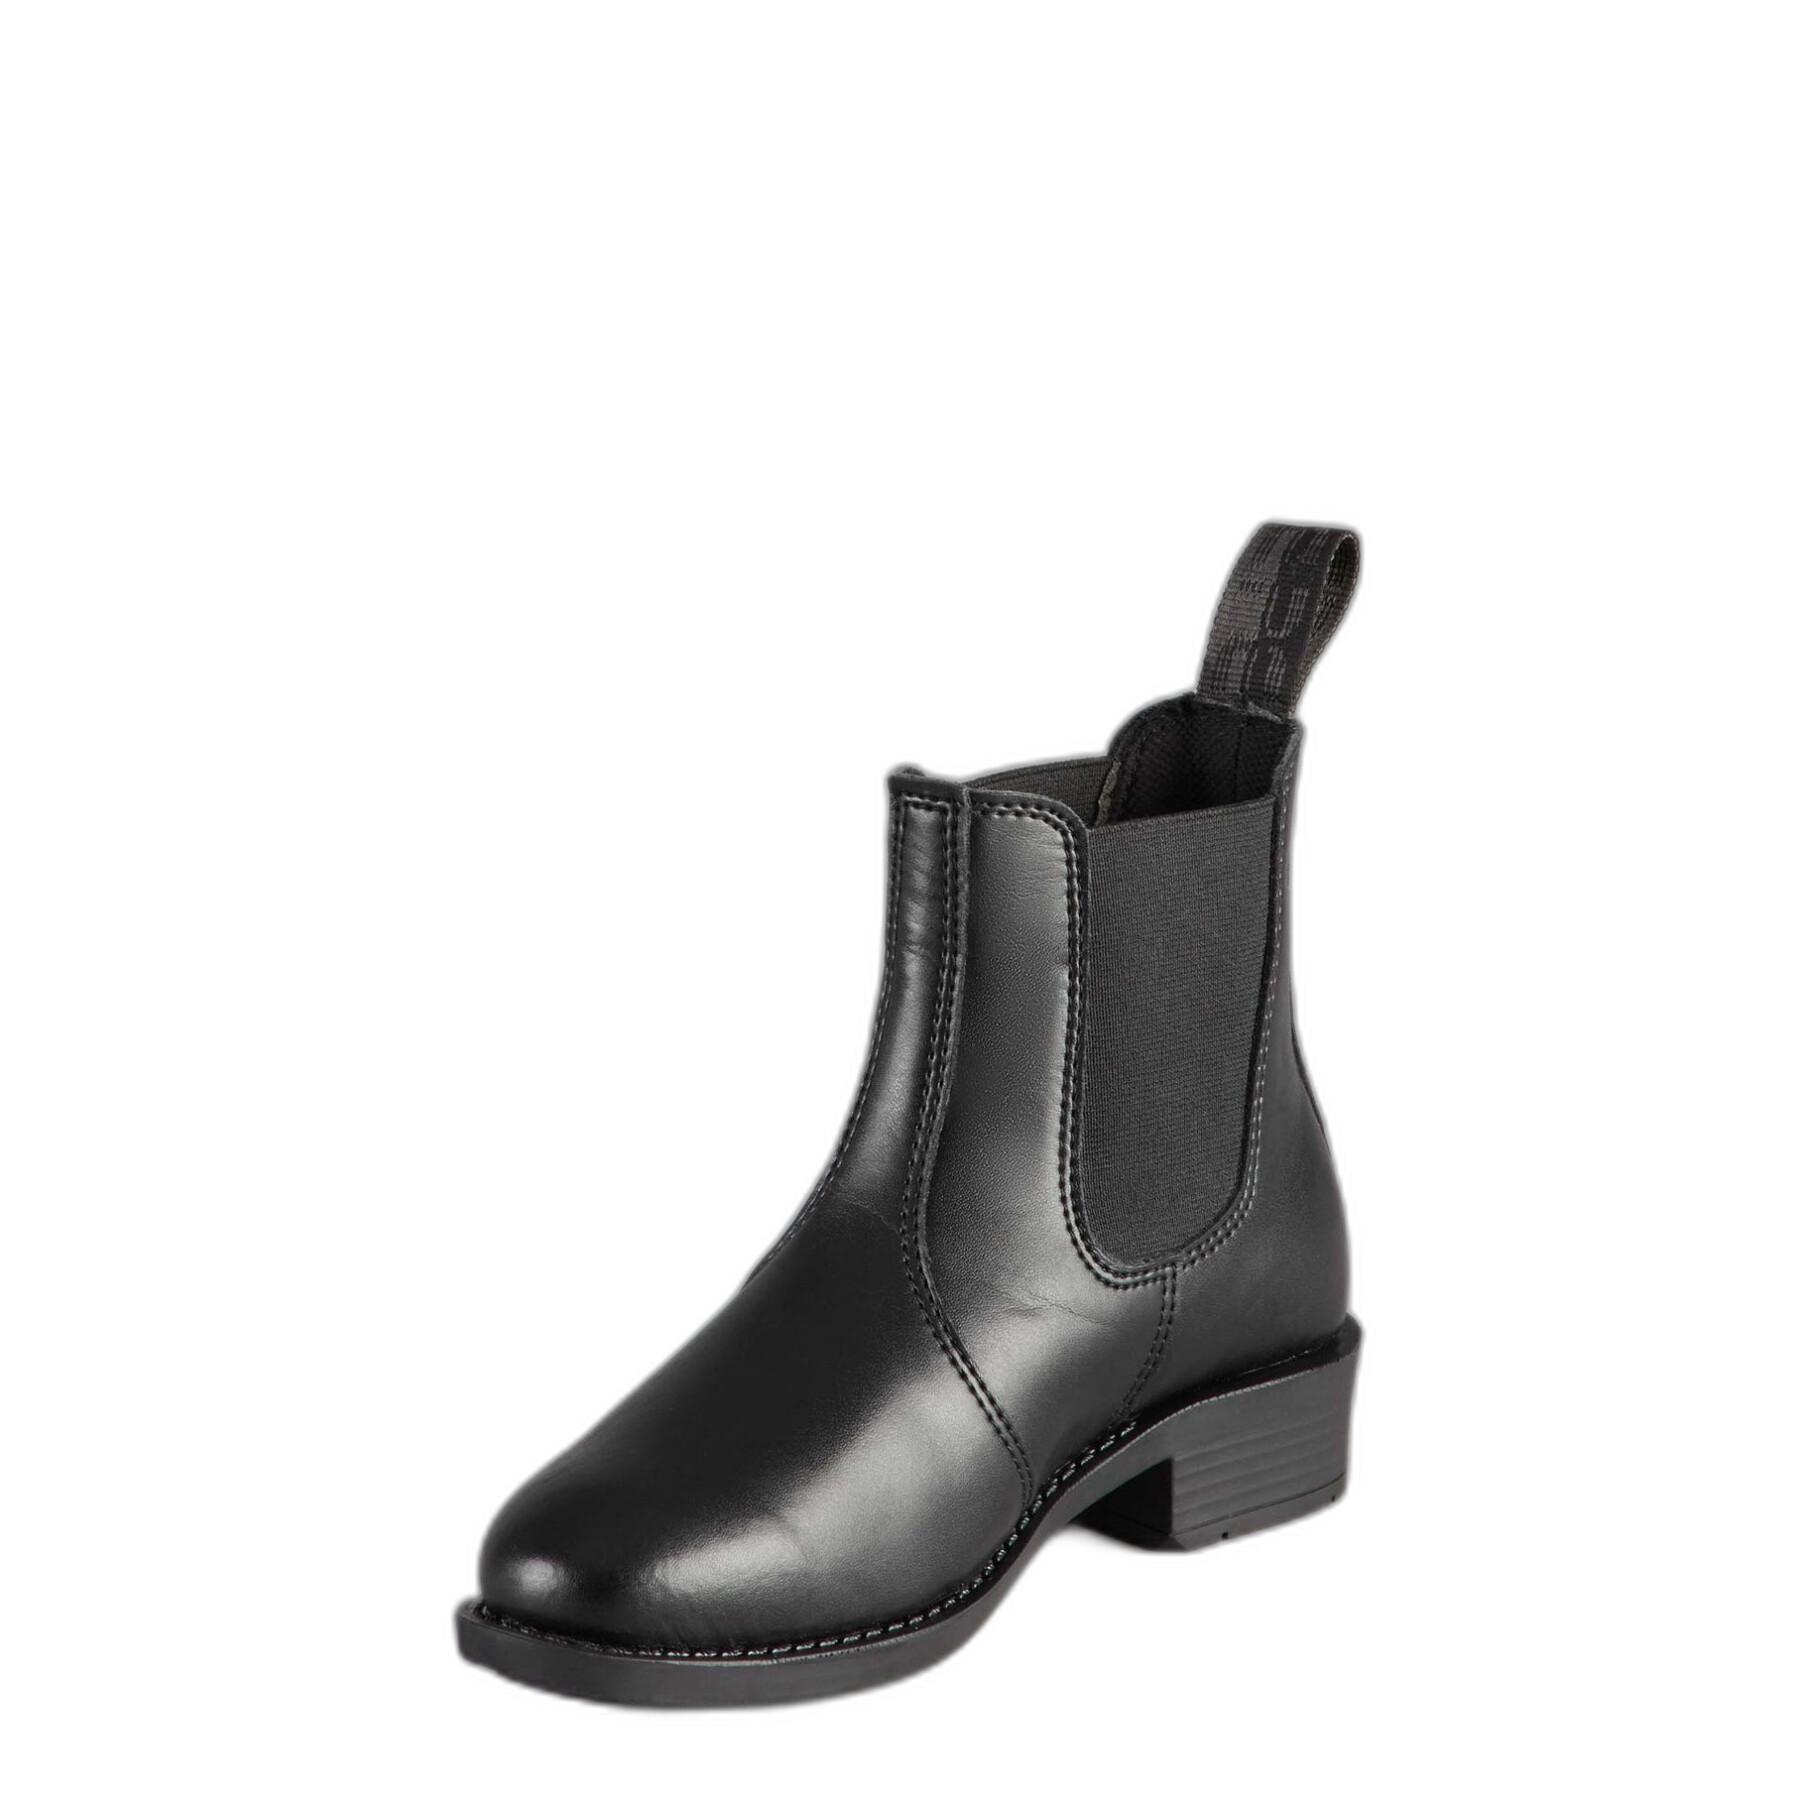 Boots synthetic chelsea riding shoes Premier Equine Rossago